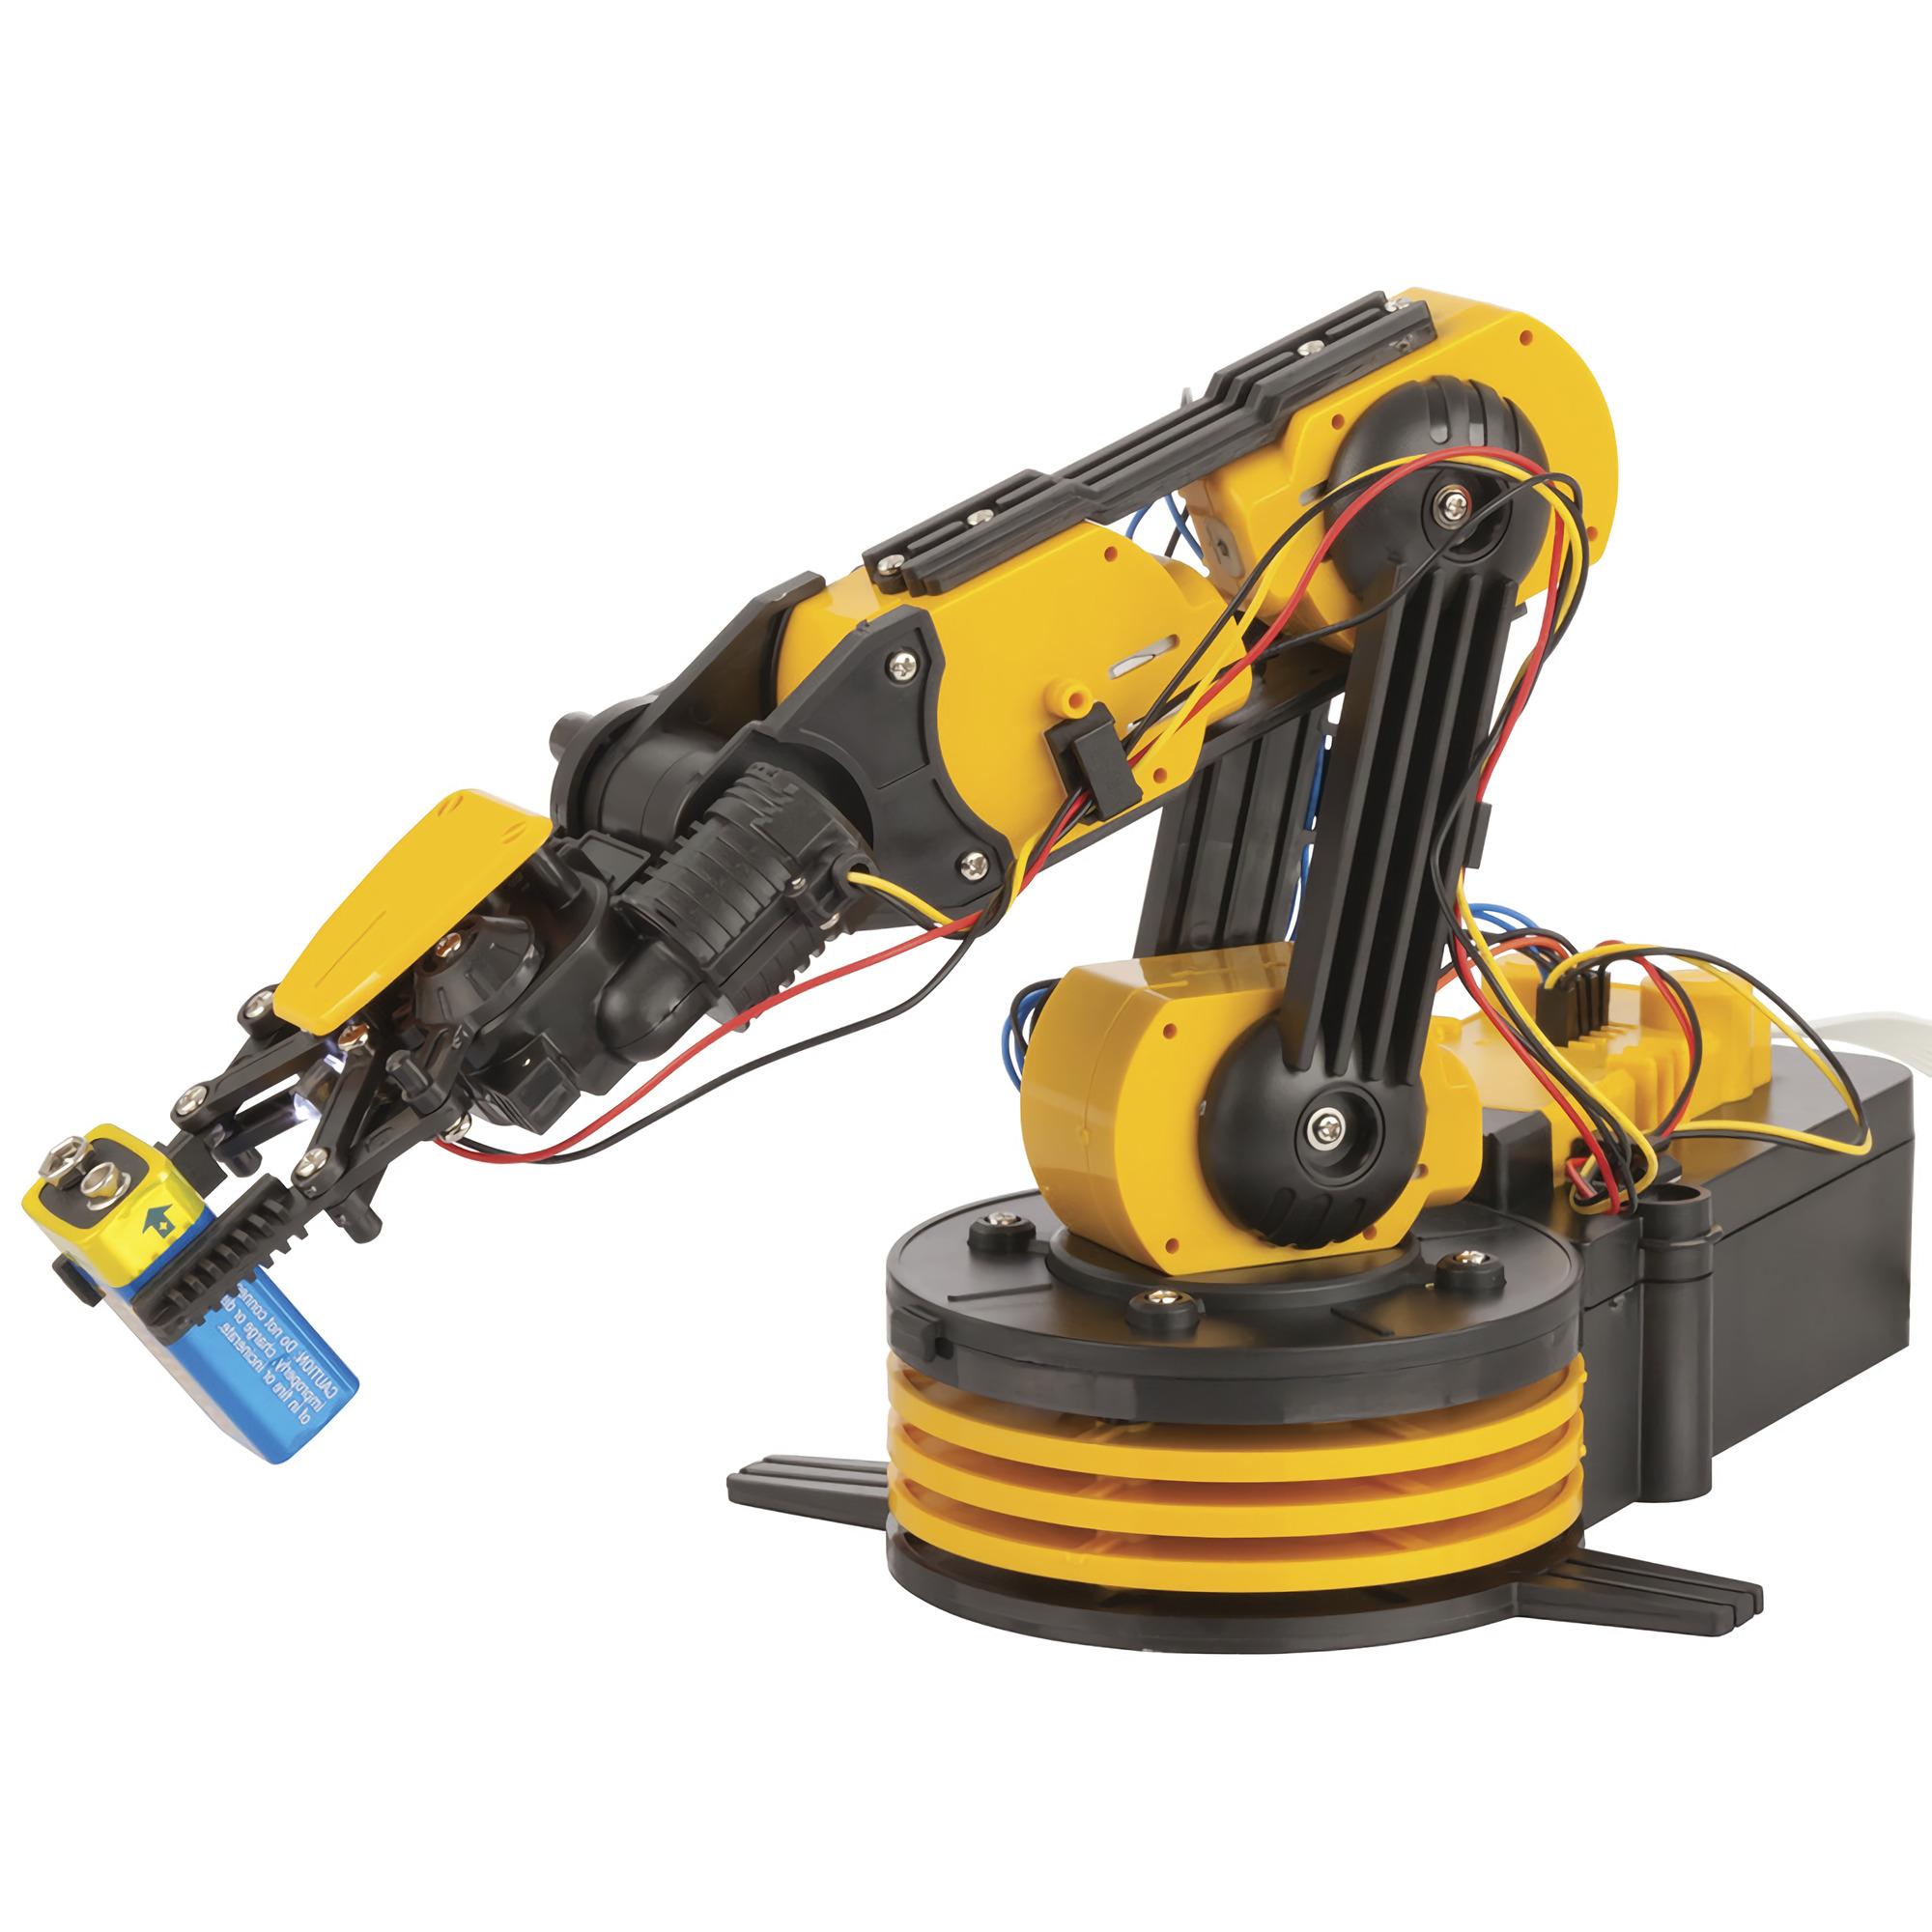 Wired Control Robot Arm Batteries-Powered Toy Age 12+